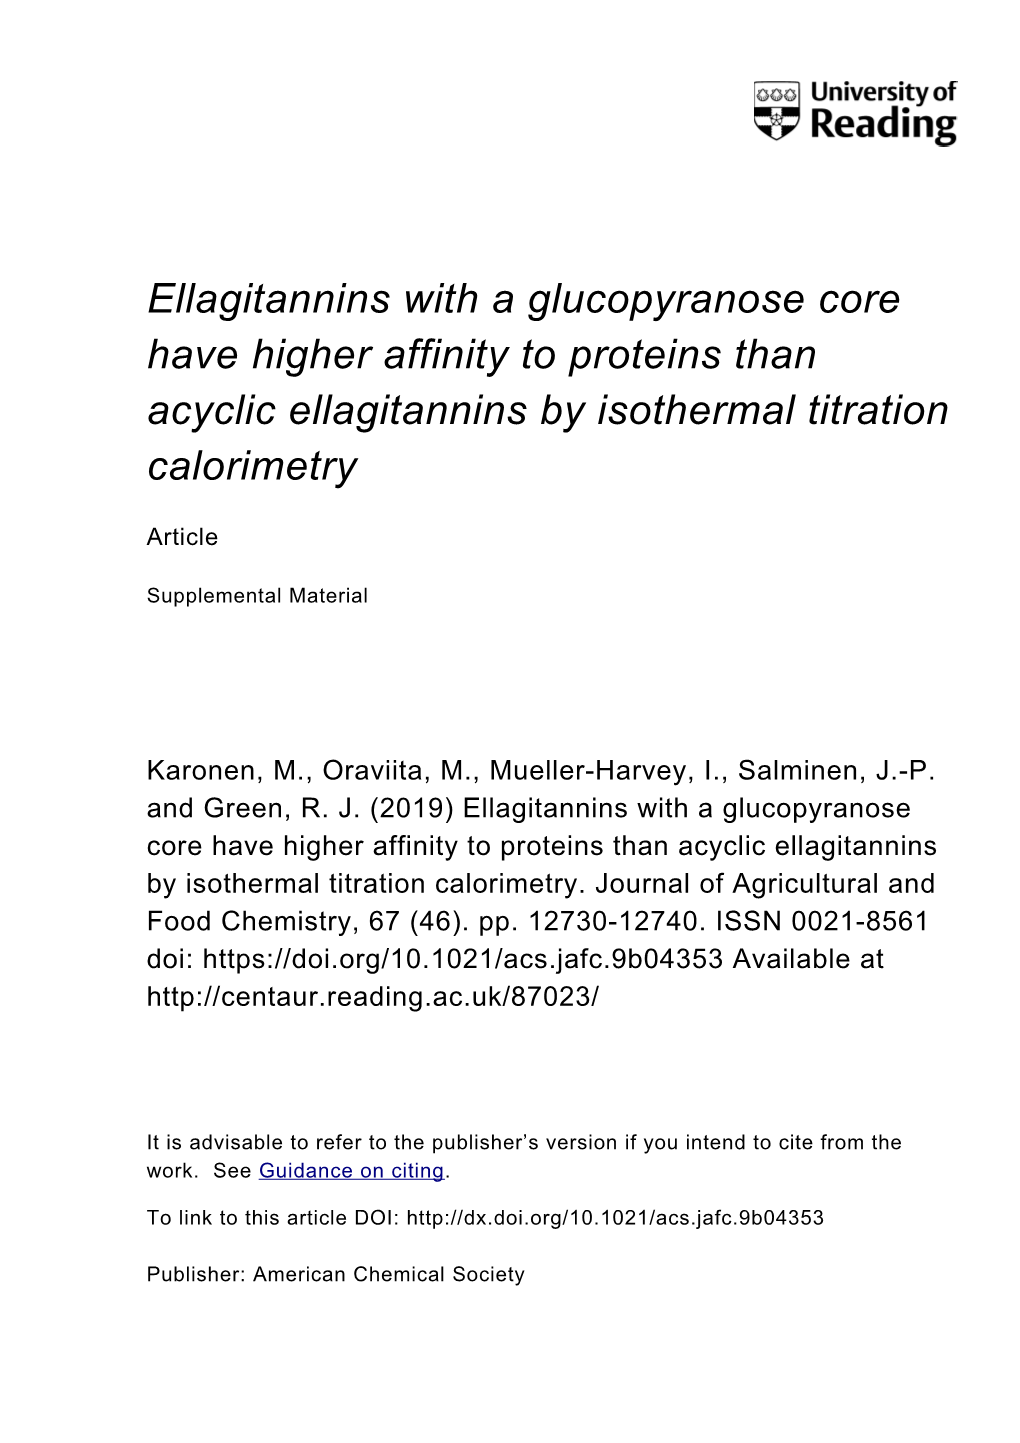 Ellagitannins with a Glucopyranose Core Have Higher Affinity to Proteins Than Acyclic Ellagitannins by Isothermal Titration Calorimetry